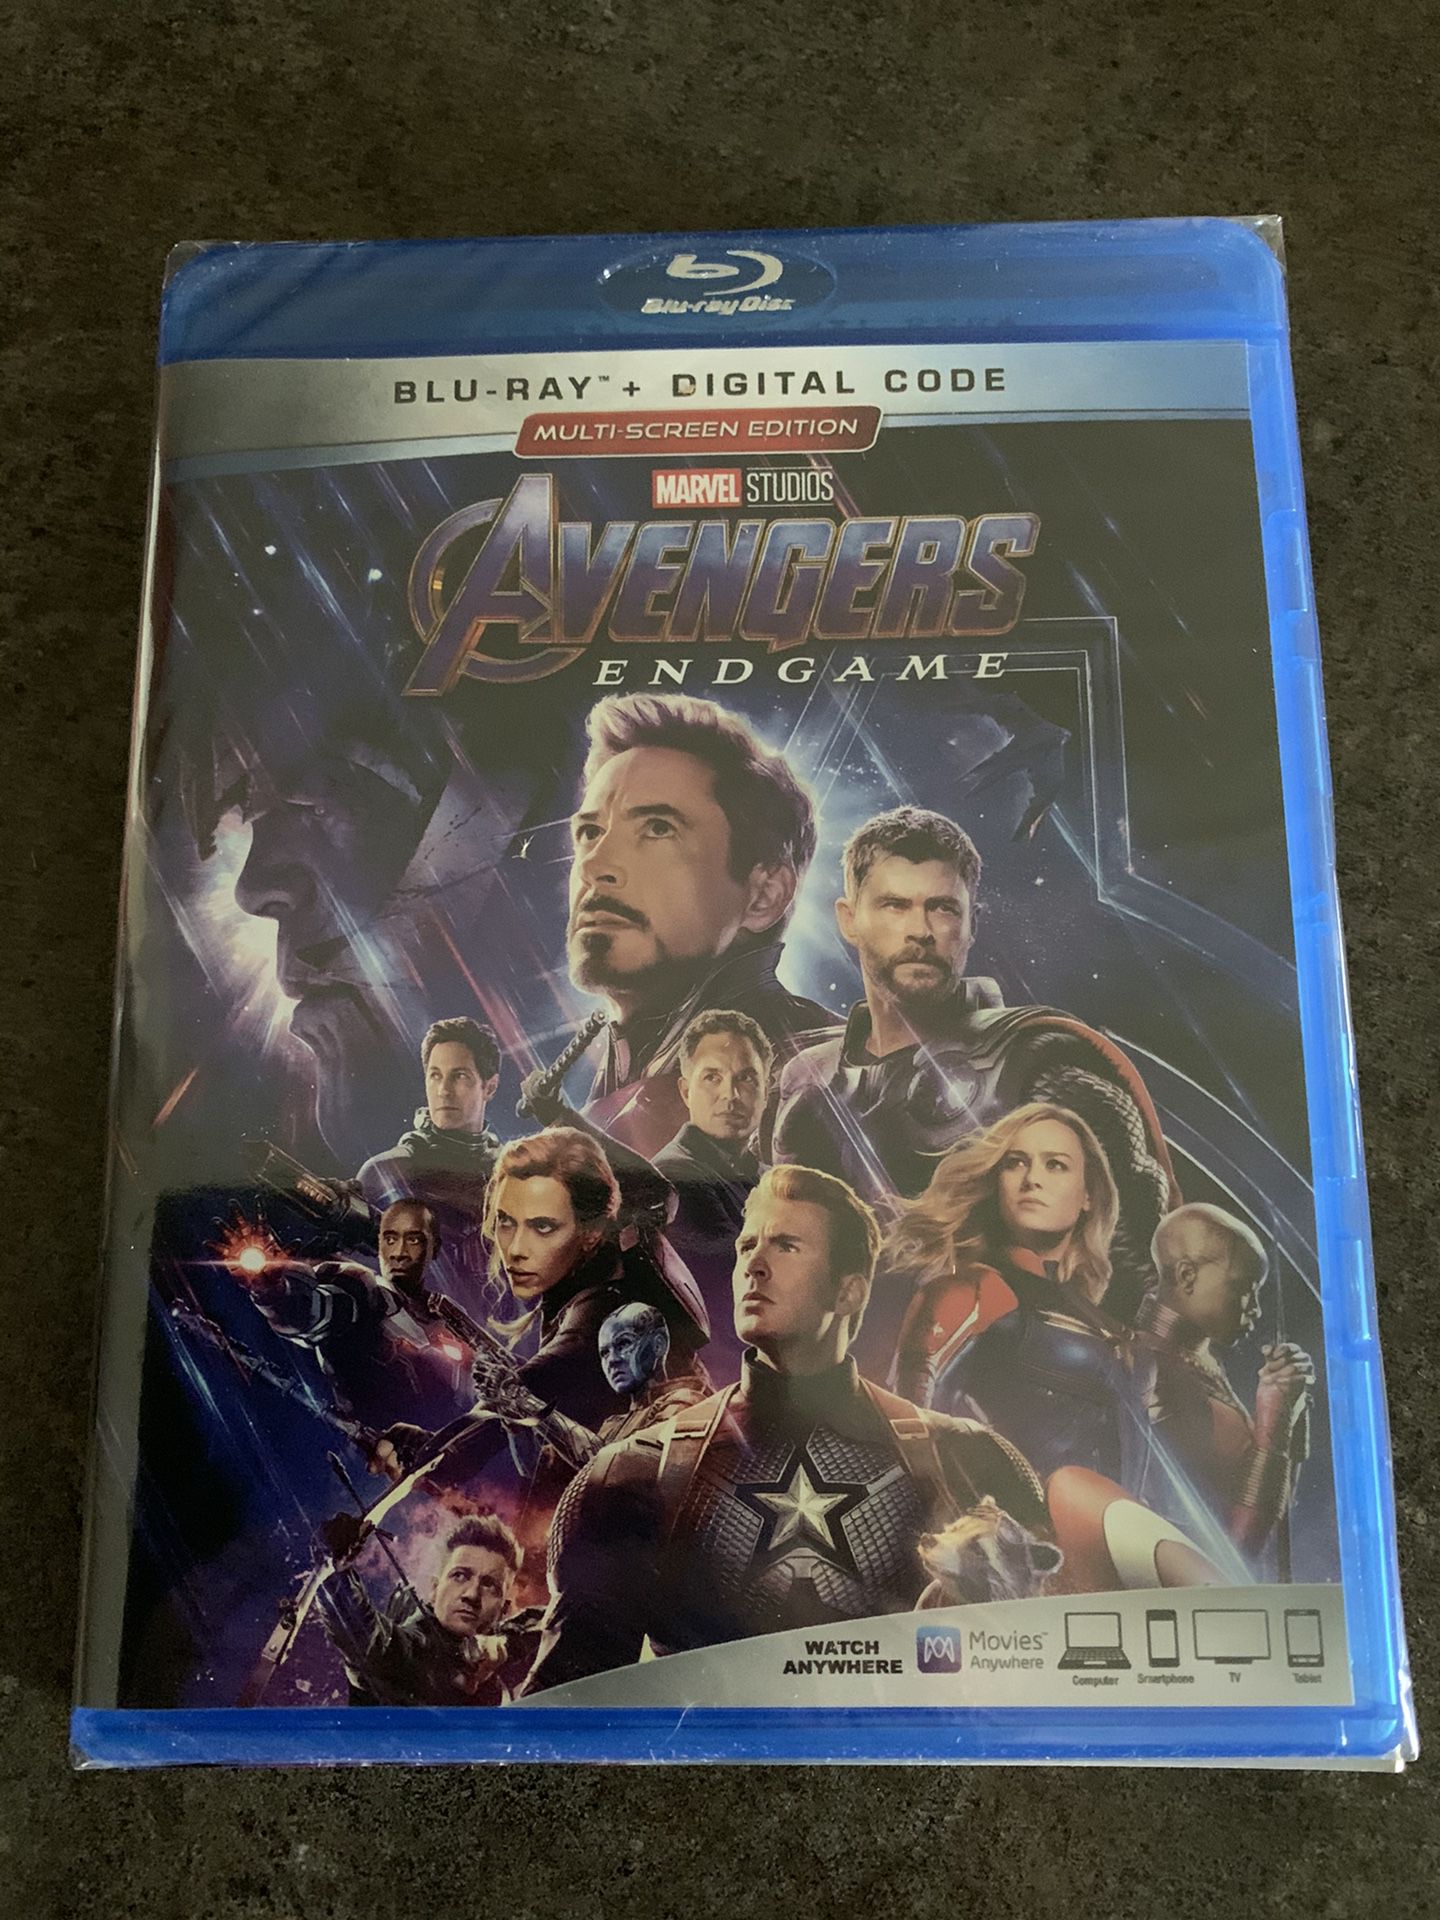 Blu-Ray DVD and digital copy of Avengers: Endgame